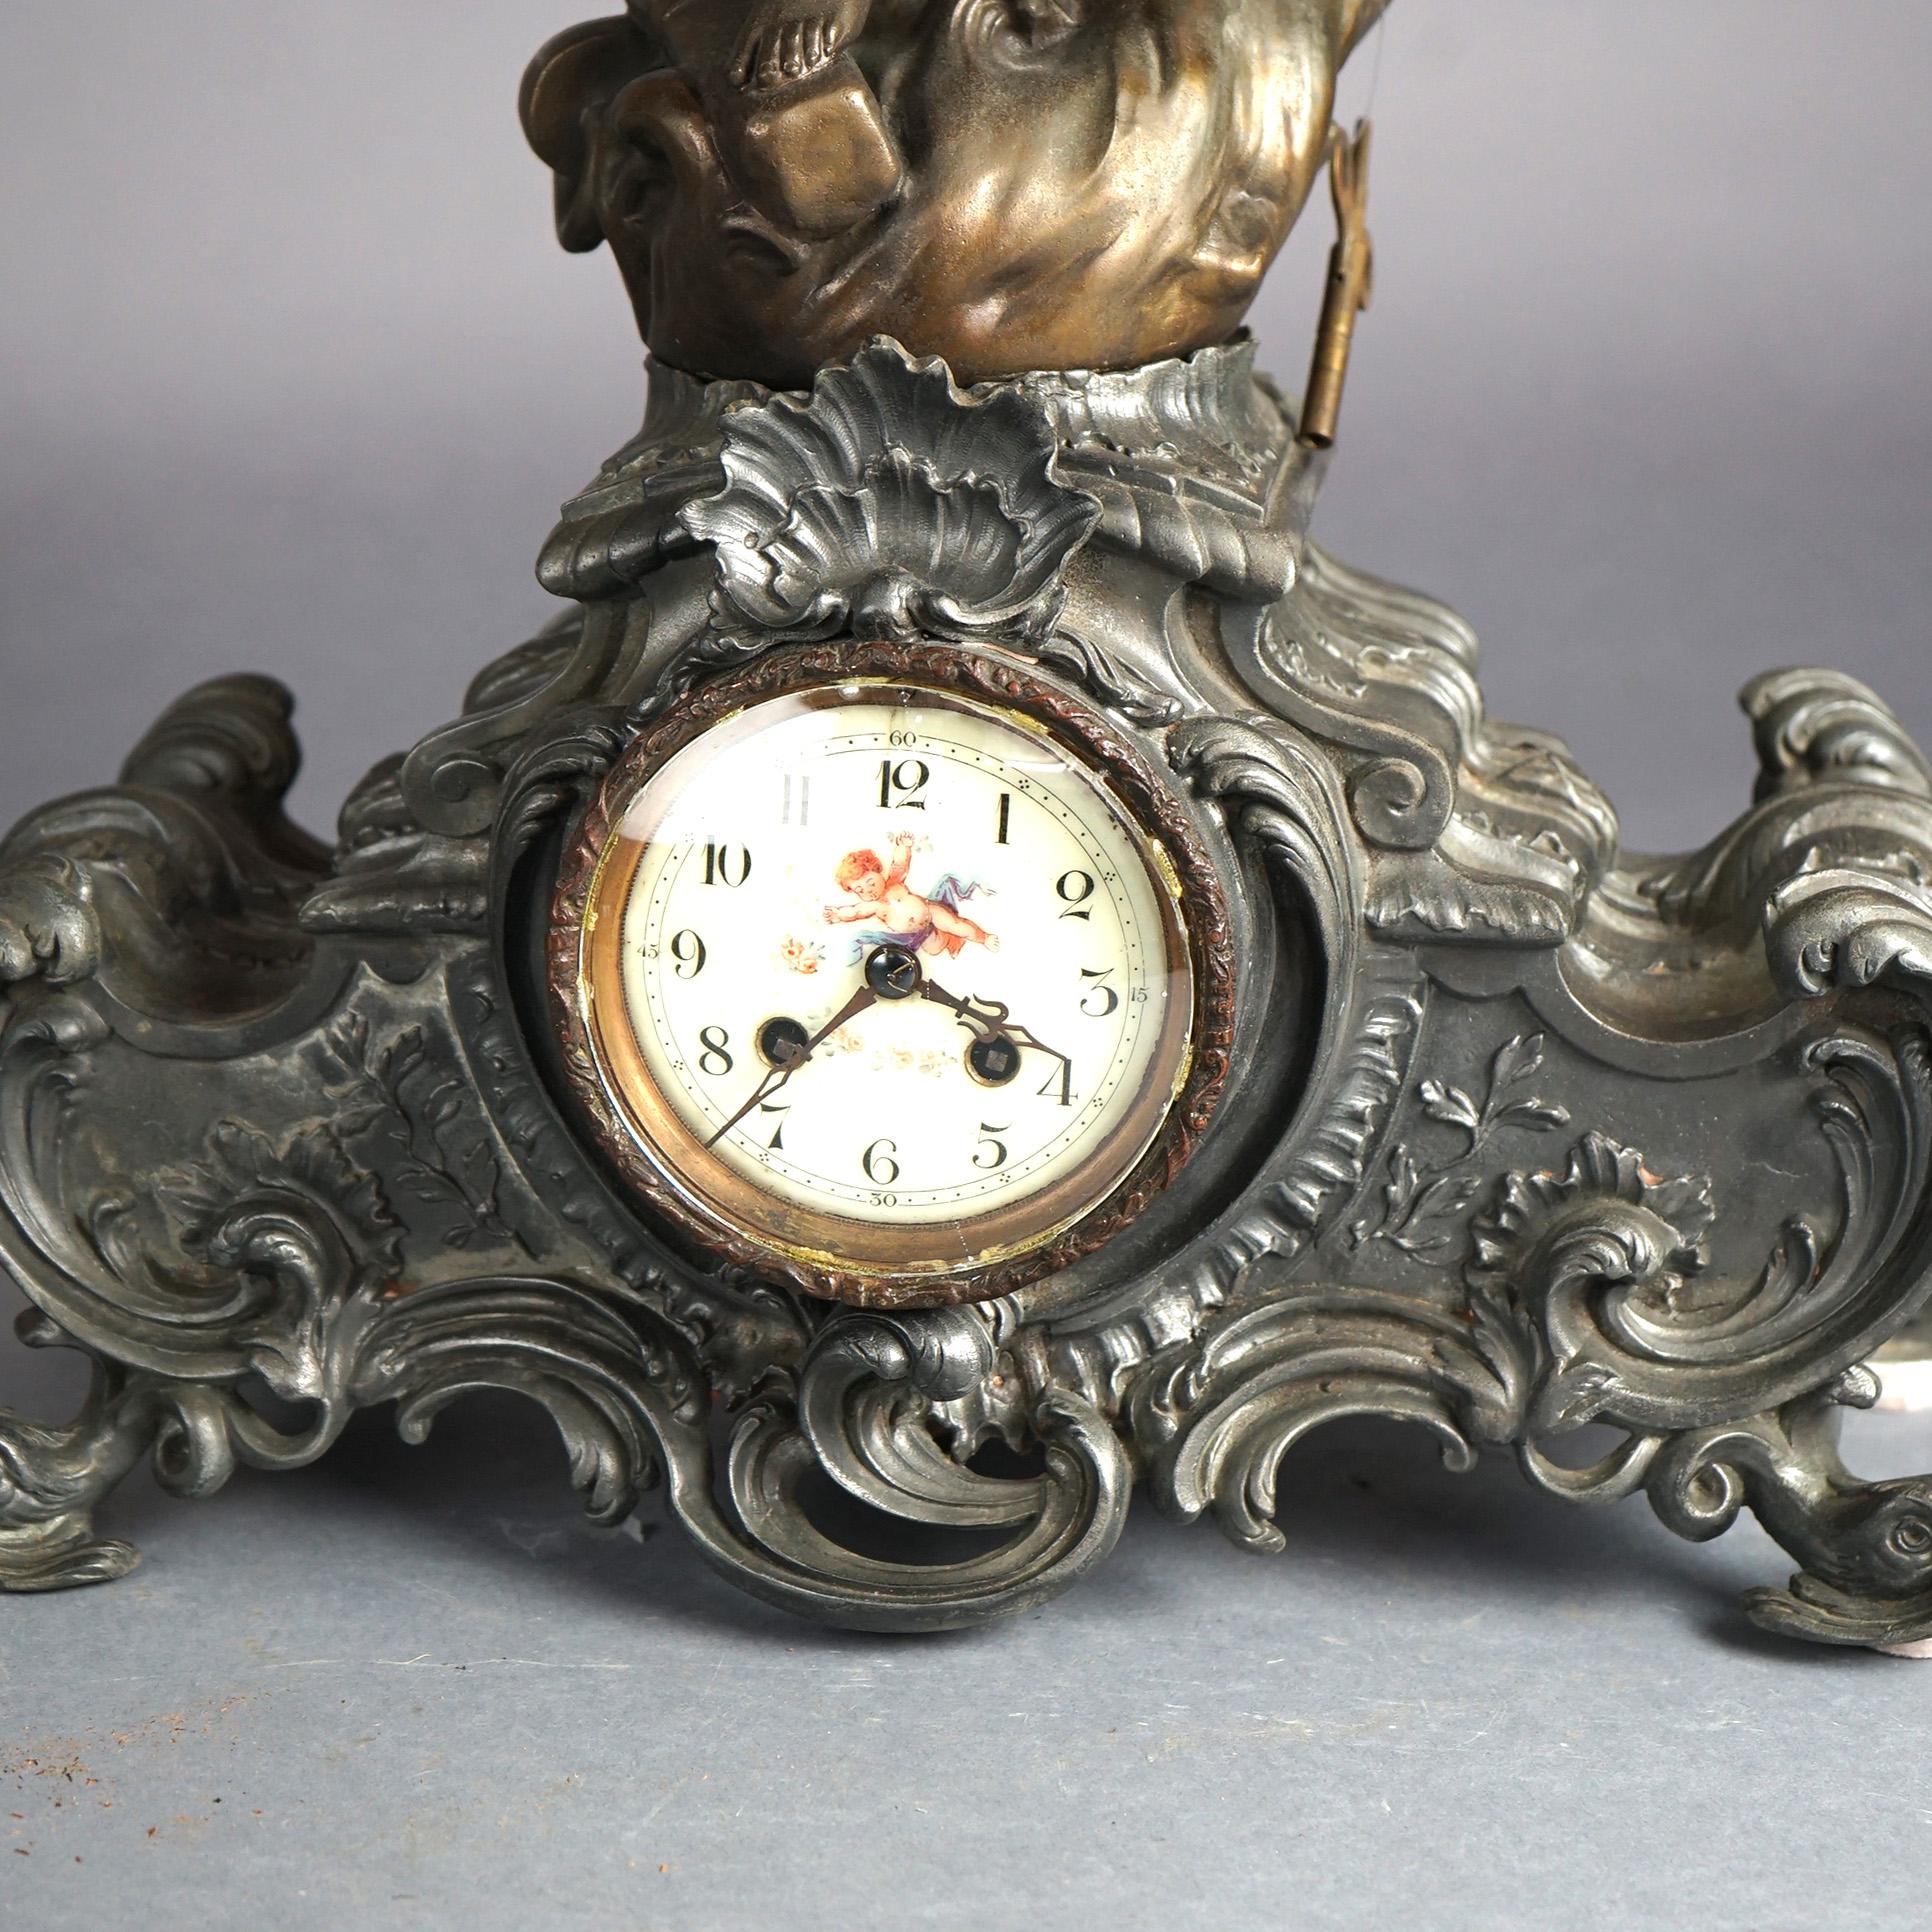 Antique Rococo Revival Bronzed Metal Figural Mantle Clock Signed Rancoulet C1890 3